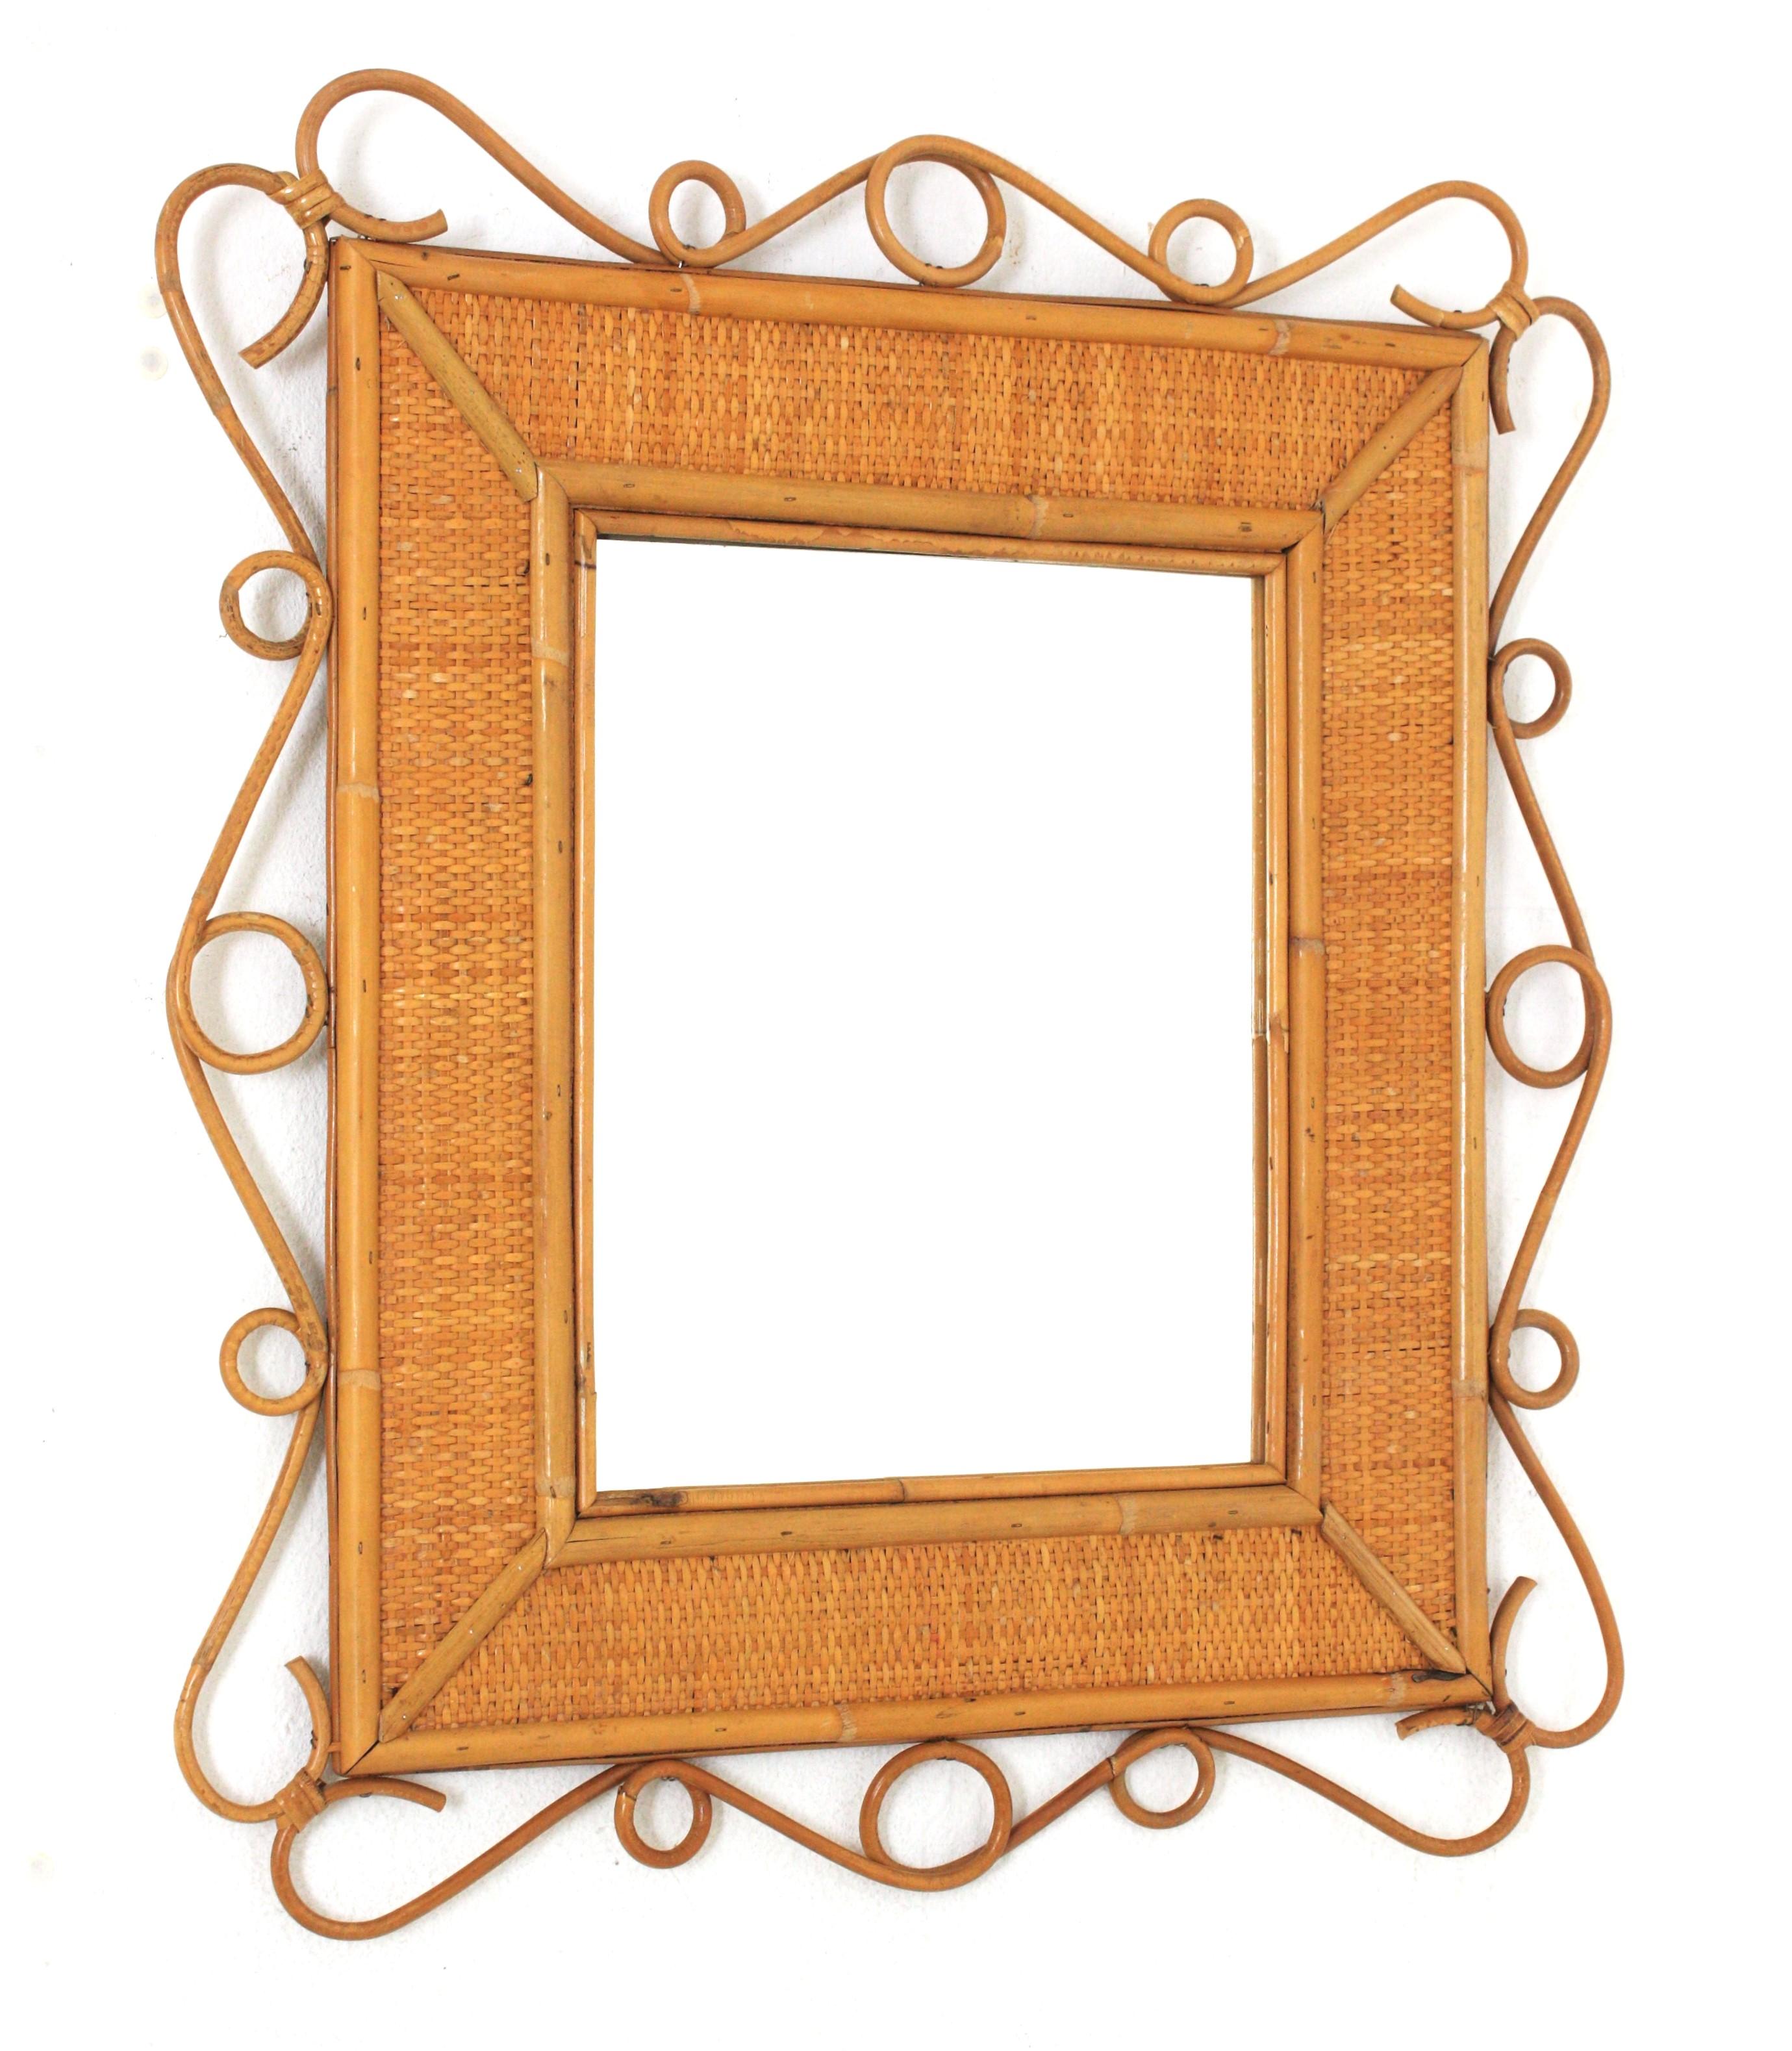 Rattan wall mirror, Franco Albini Style. Italy, 1960s.
A highly decorative wicker wire and rattan mirror with the taste of the Mediterranean Coast style. Handcrafted in the manner of Franco Albini. Excellent vintage condition.
A woven wicker